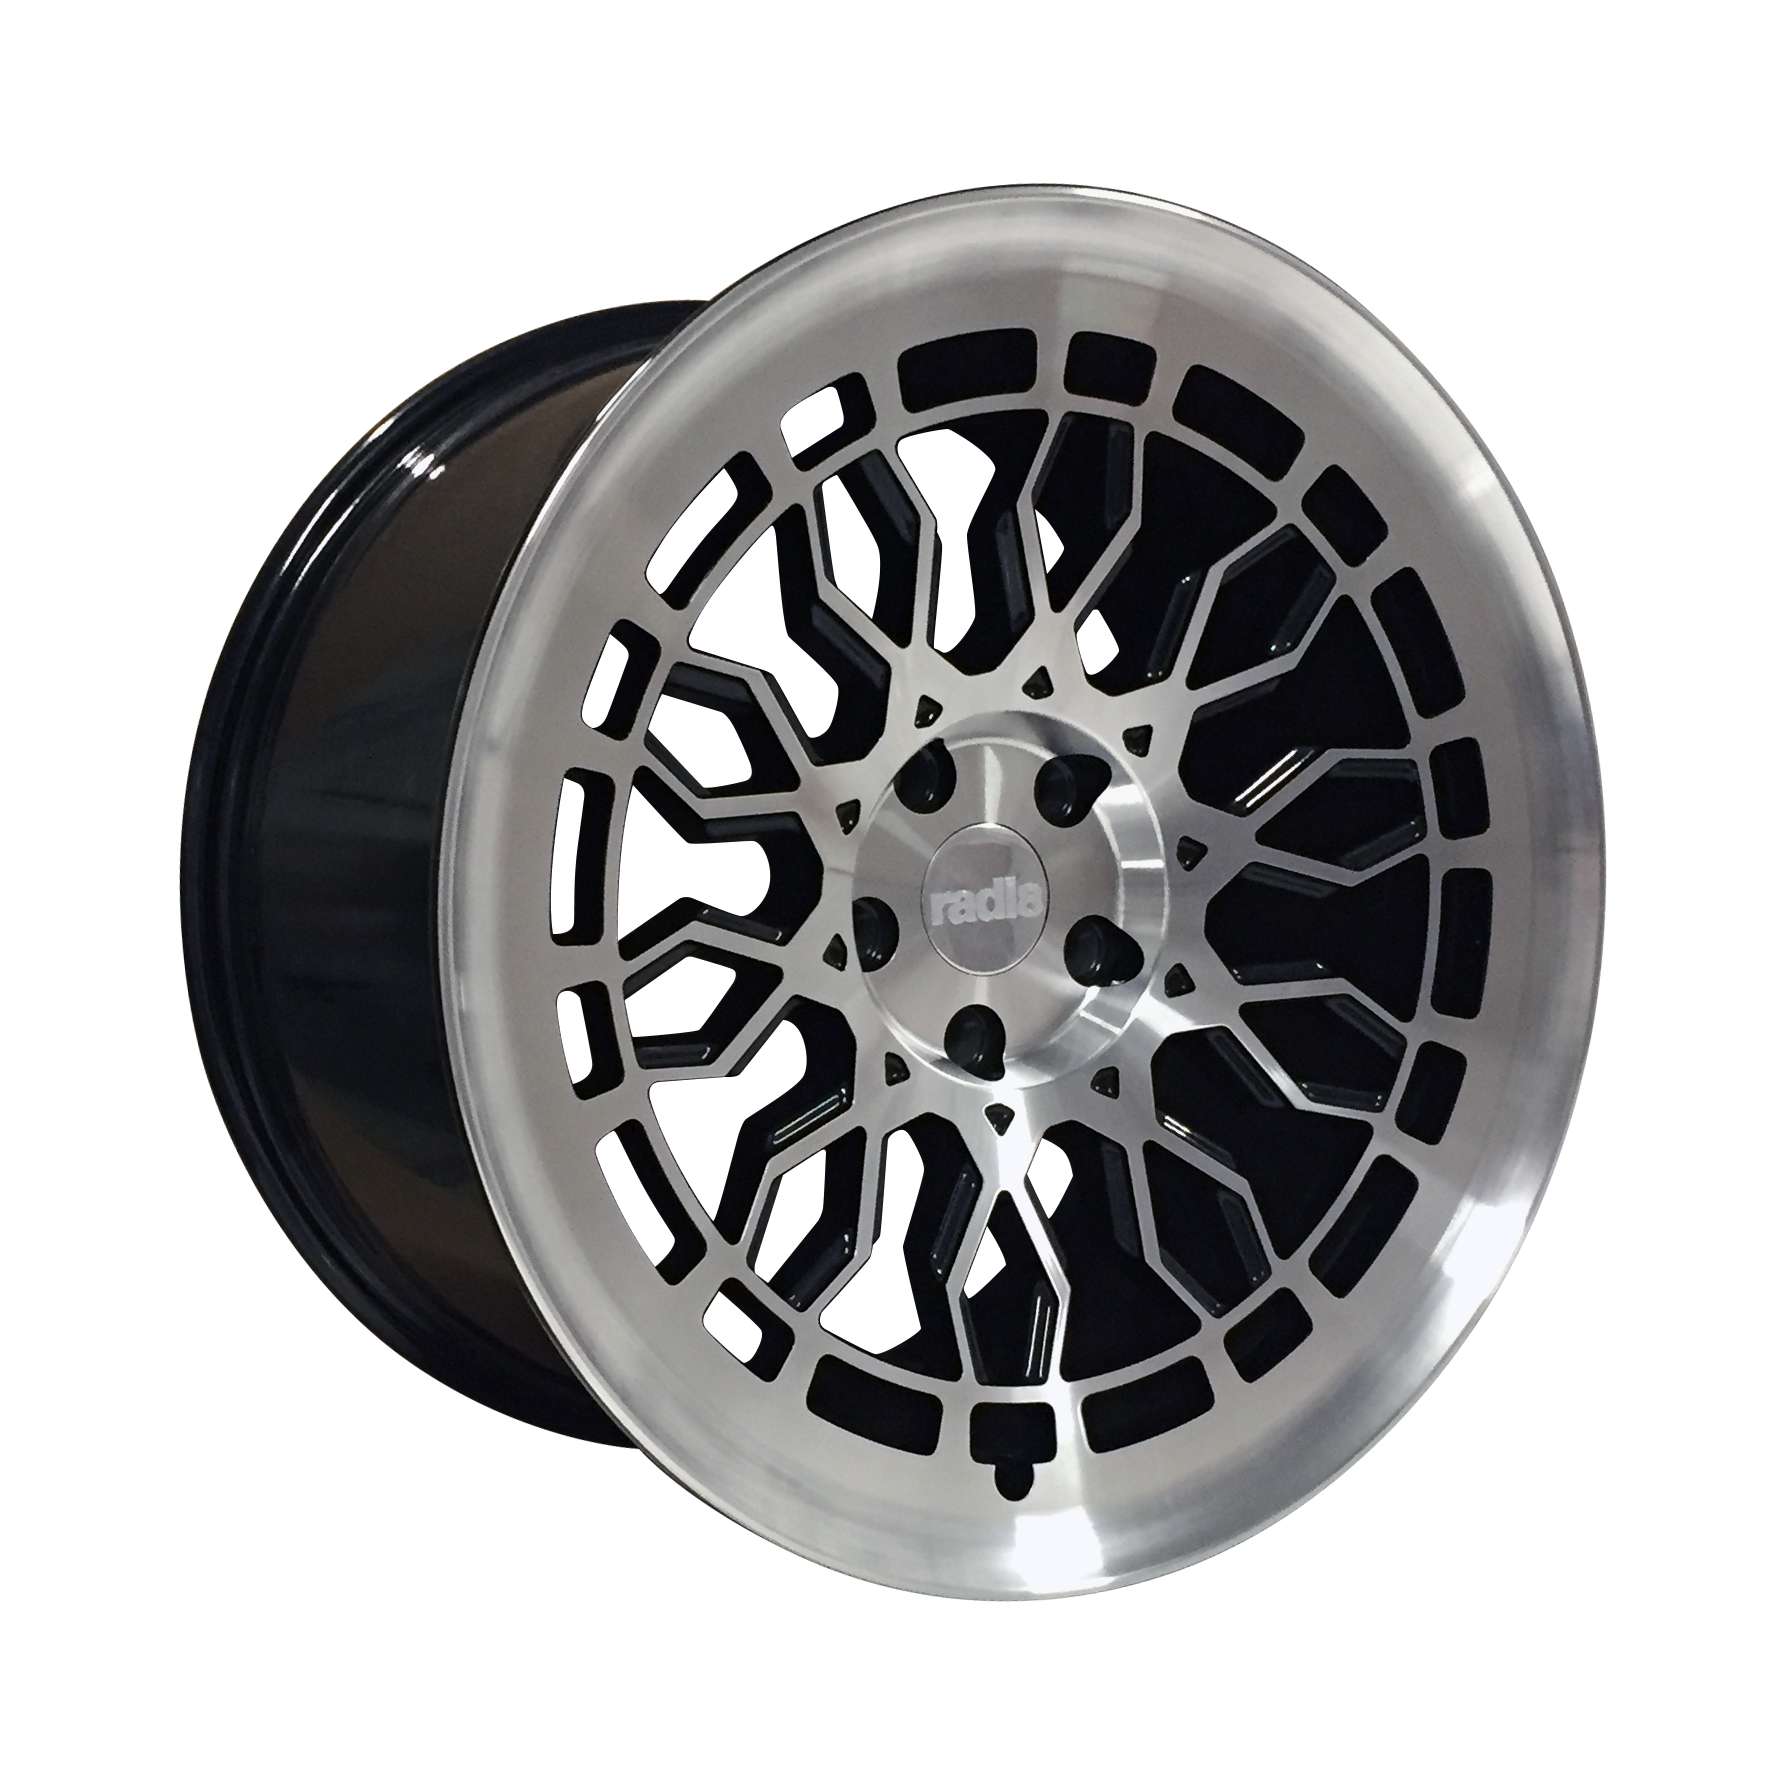 NEW 18  RADI8 R8A10 ALLOY WHEELS IN GLOSS BLACK WITH POLISHED FACE  WIDER 9 5  REARS